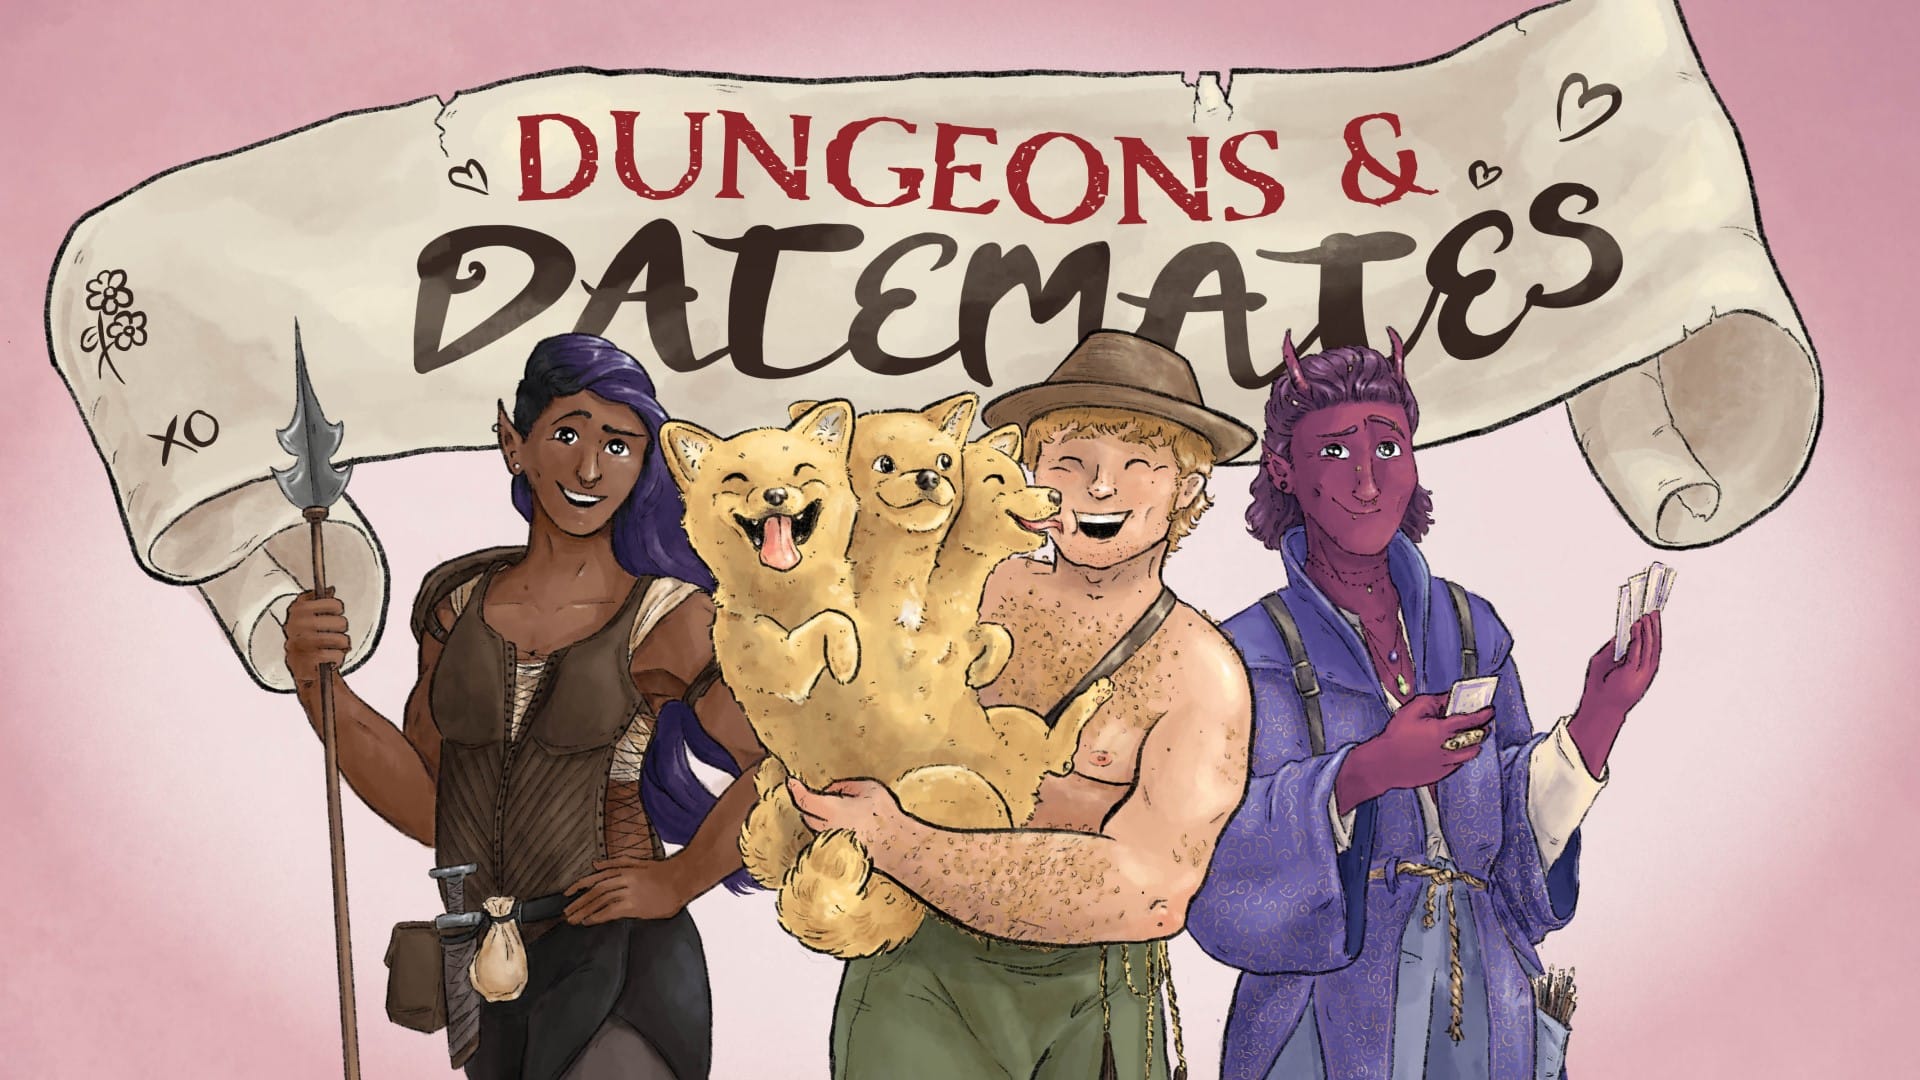 Promo image of Dungeons & Datemates, showing a woman with a spear, a man holding a cerberus puppy, and a nonbinary tiefling in a robe.